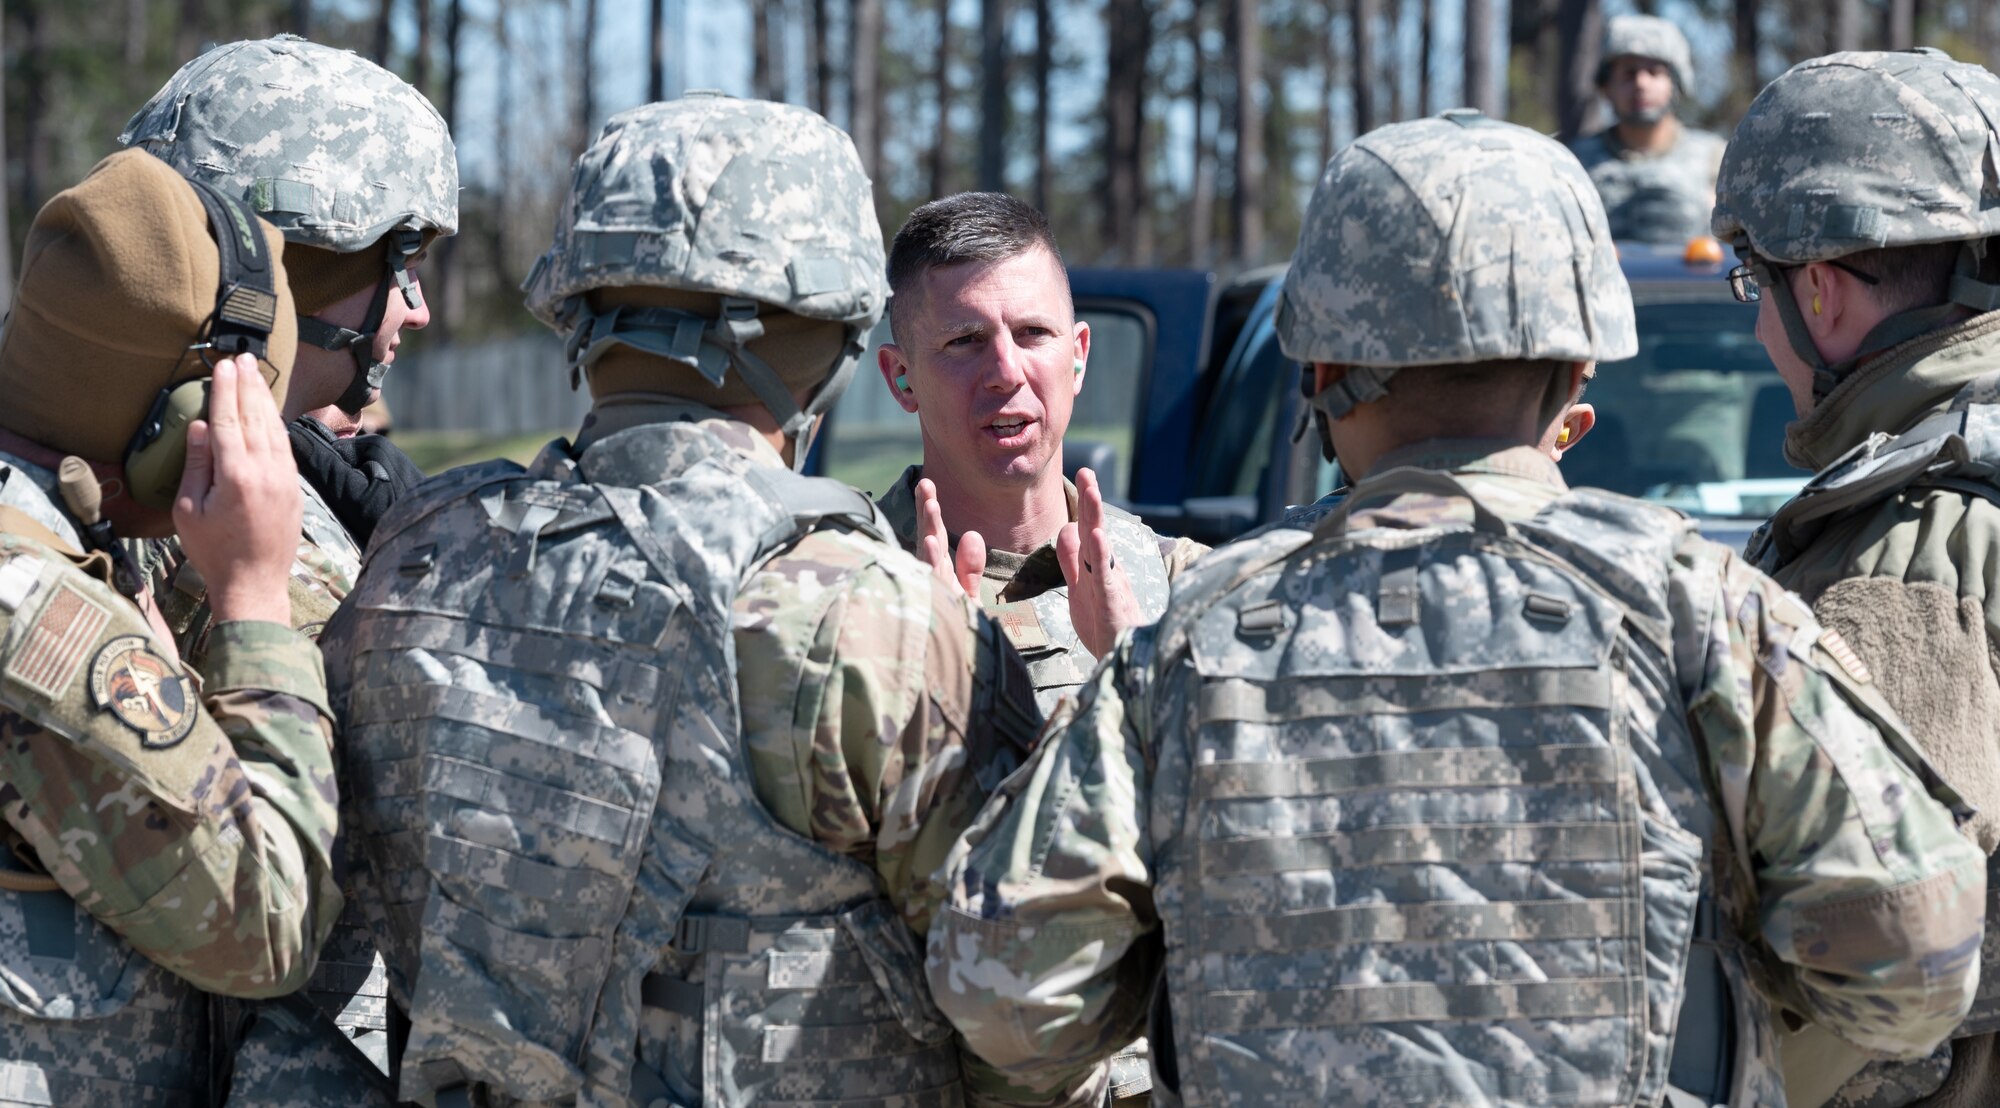 Chaplain (Capt.) David Shrader, 4th Air Base Squadron chaplain, gives a brief to multi-capable Airmen as part of a mass casualty event during exercise Agile Cub 4 at Marine Corps Air Station Cherry Point, North Carolina, March 8, 2023. This agile combat employment exercise shifts the generation of airpower from large, centralized bases to networks of smaller, dispersed locations.